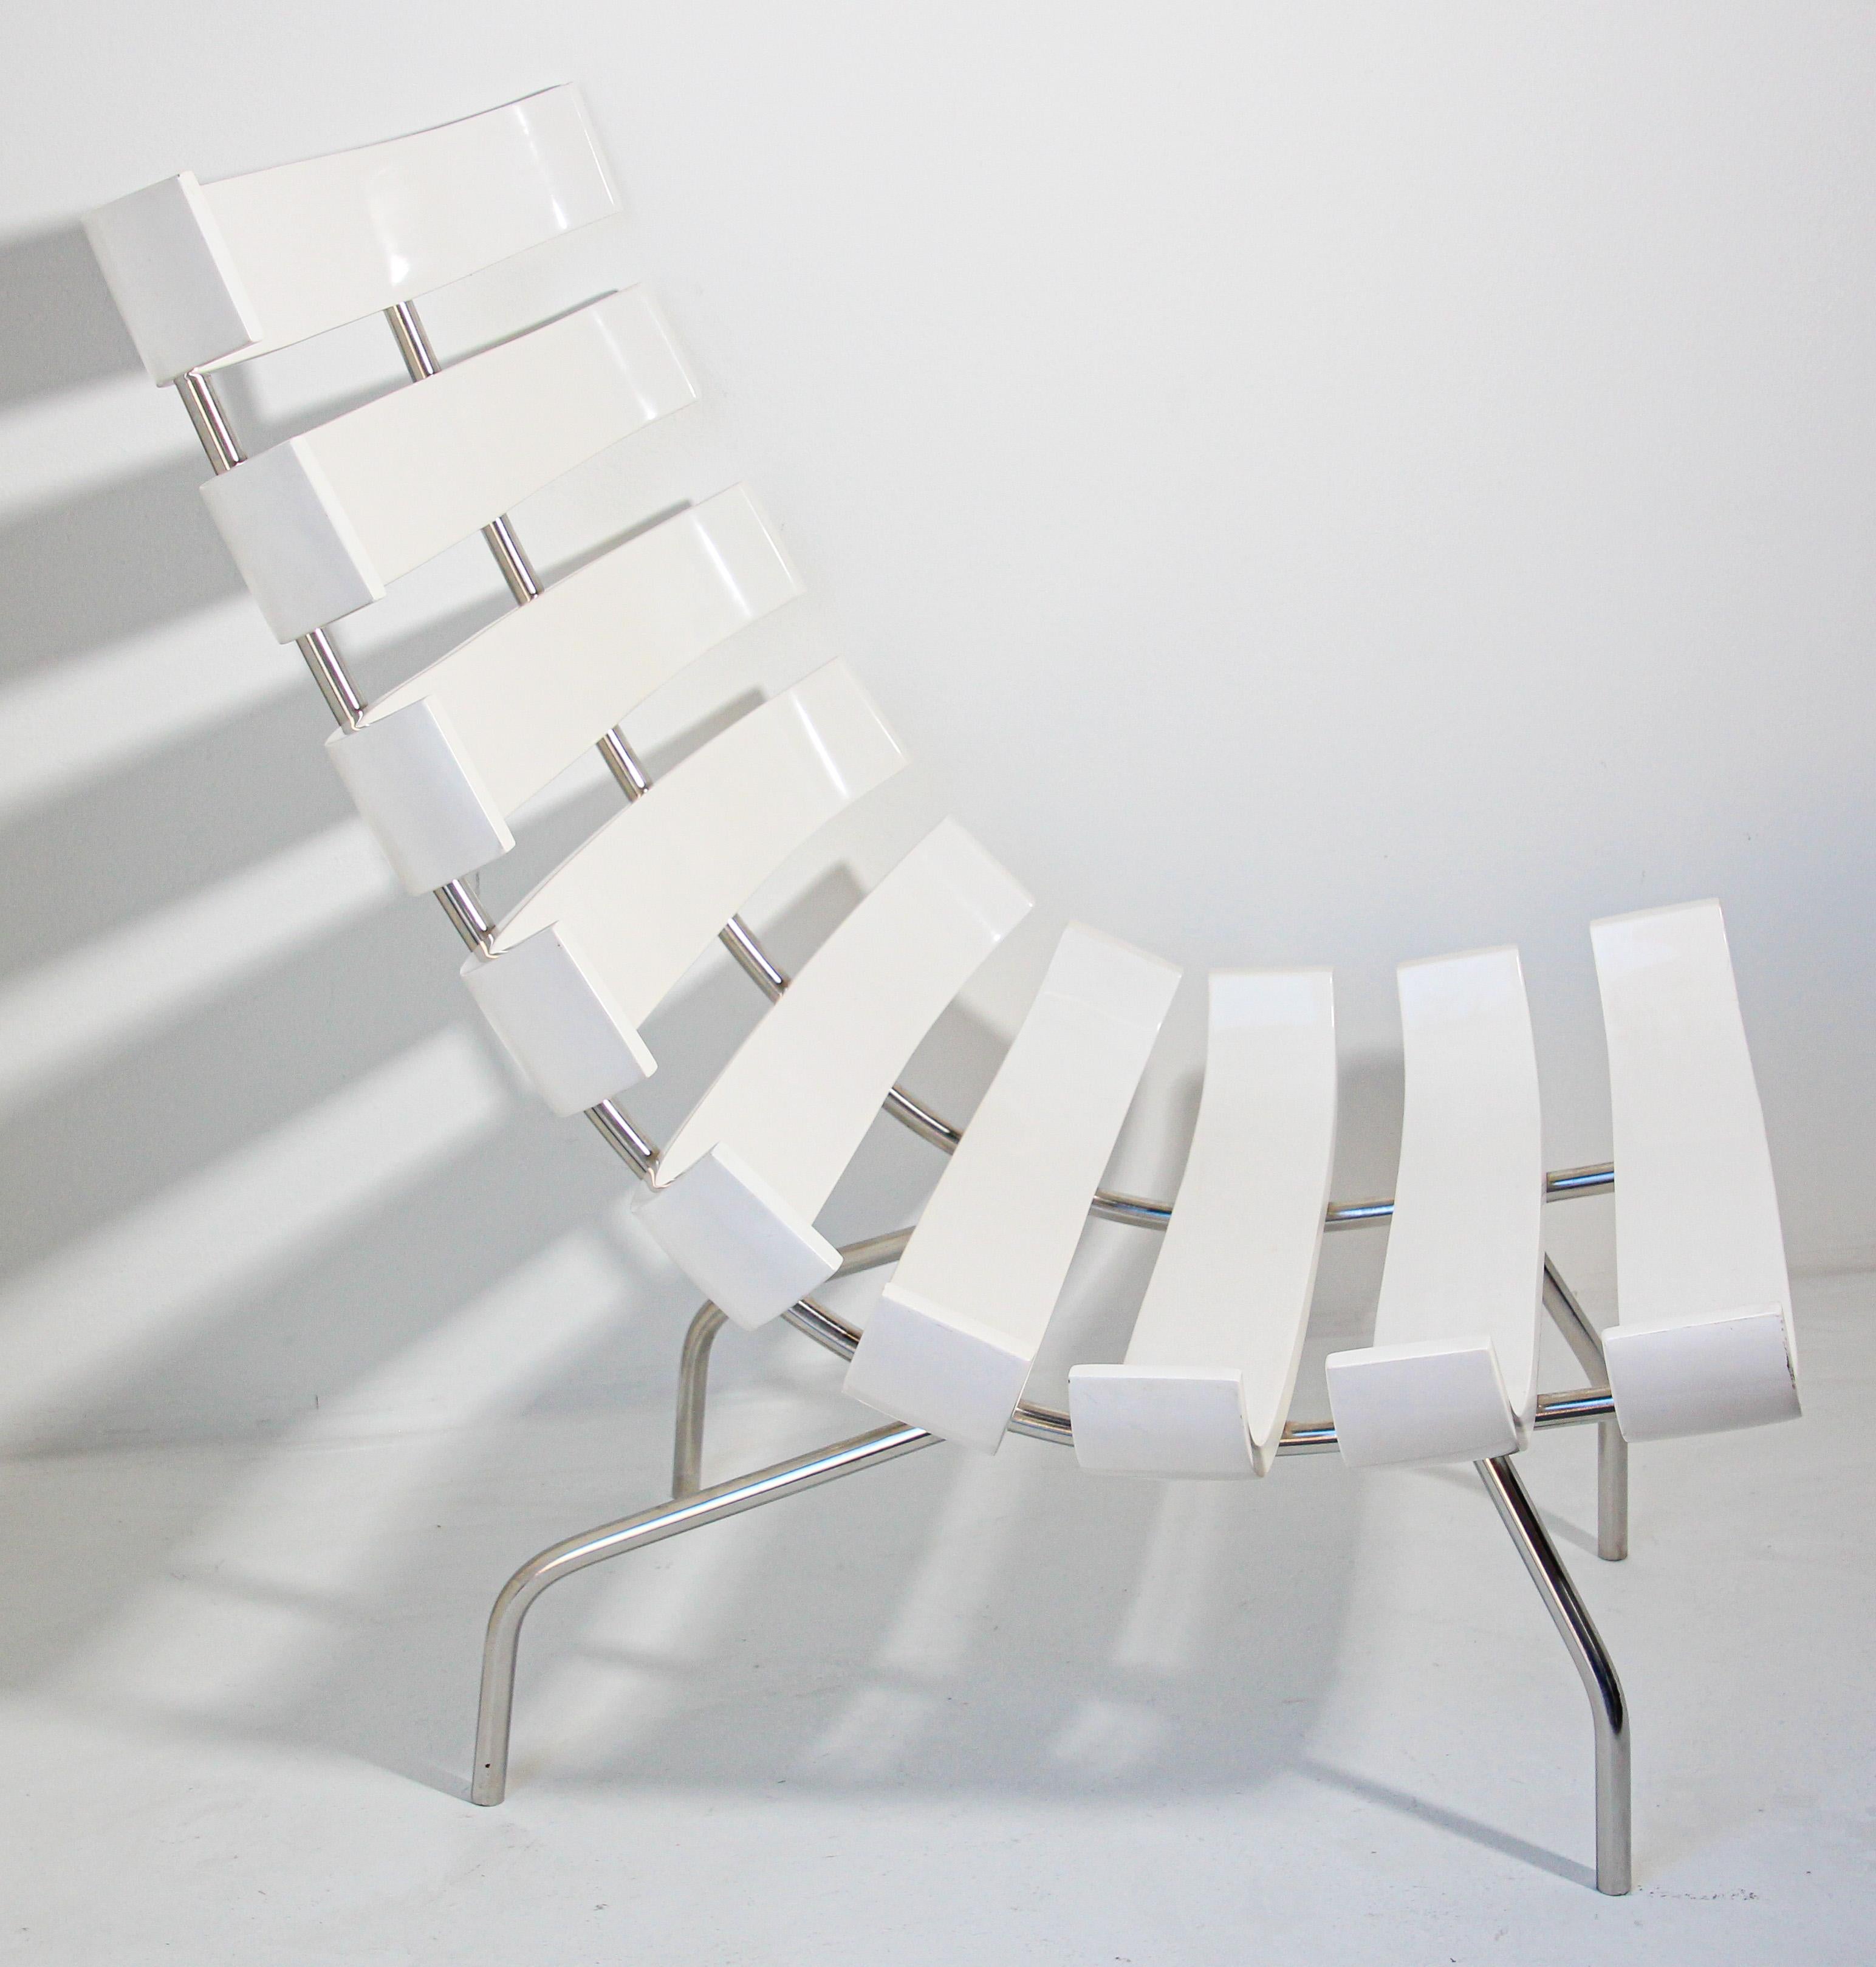 Martin Eisler Carlo Hauner Costela style lounge chair in white.
Originally designed by Martin Eisler in 1952 this is an icon of Brazilian 1950s design.
Martin Eisler and Carlo Hauner Costela lounge chair, the Costela chair was an important design